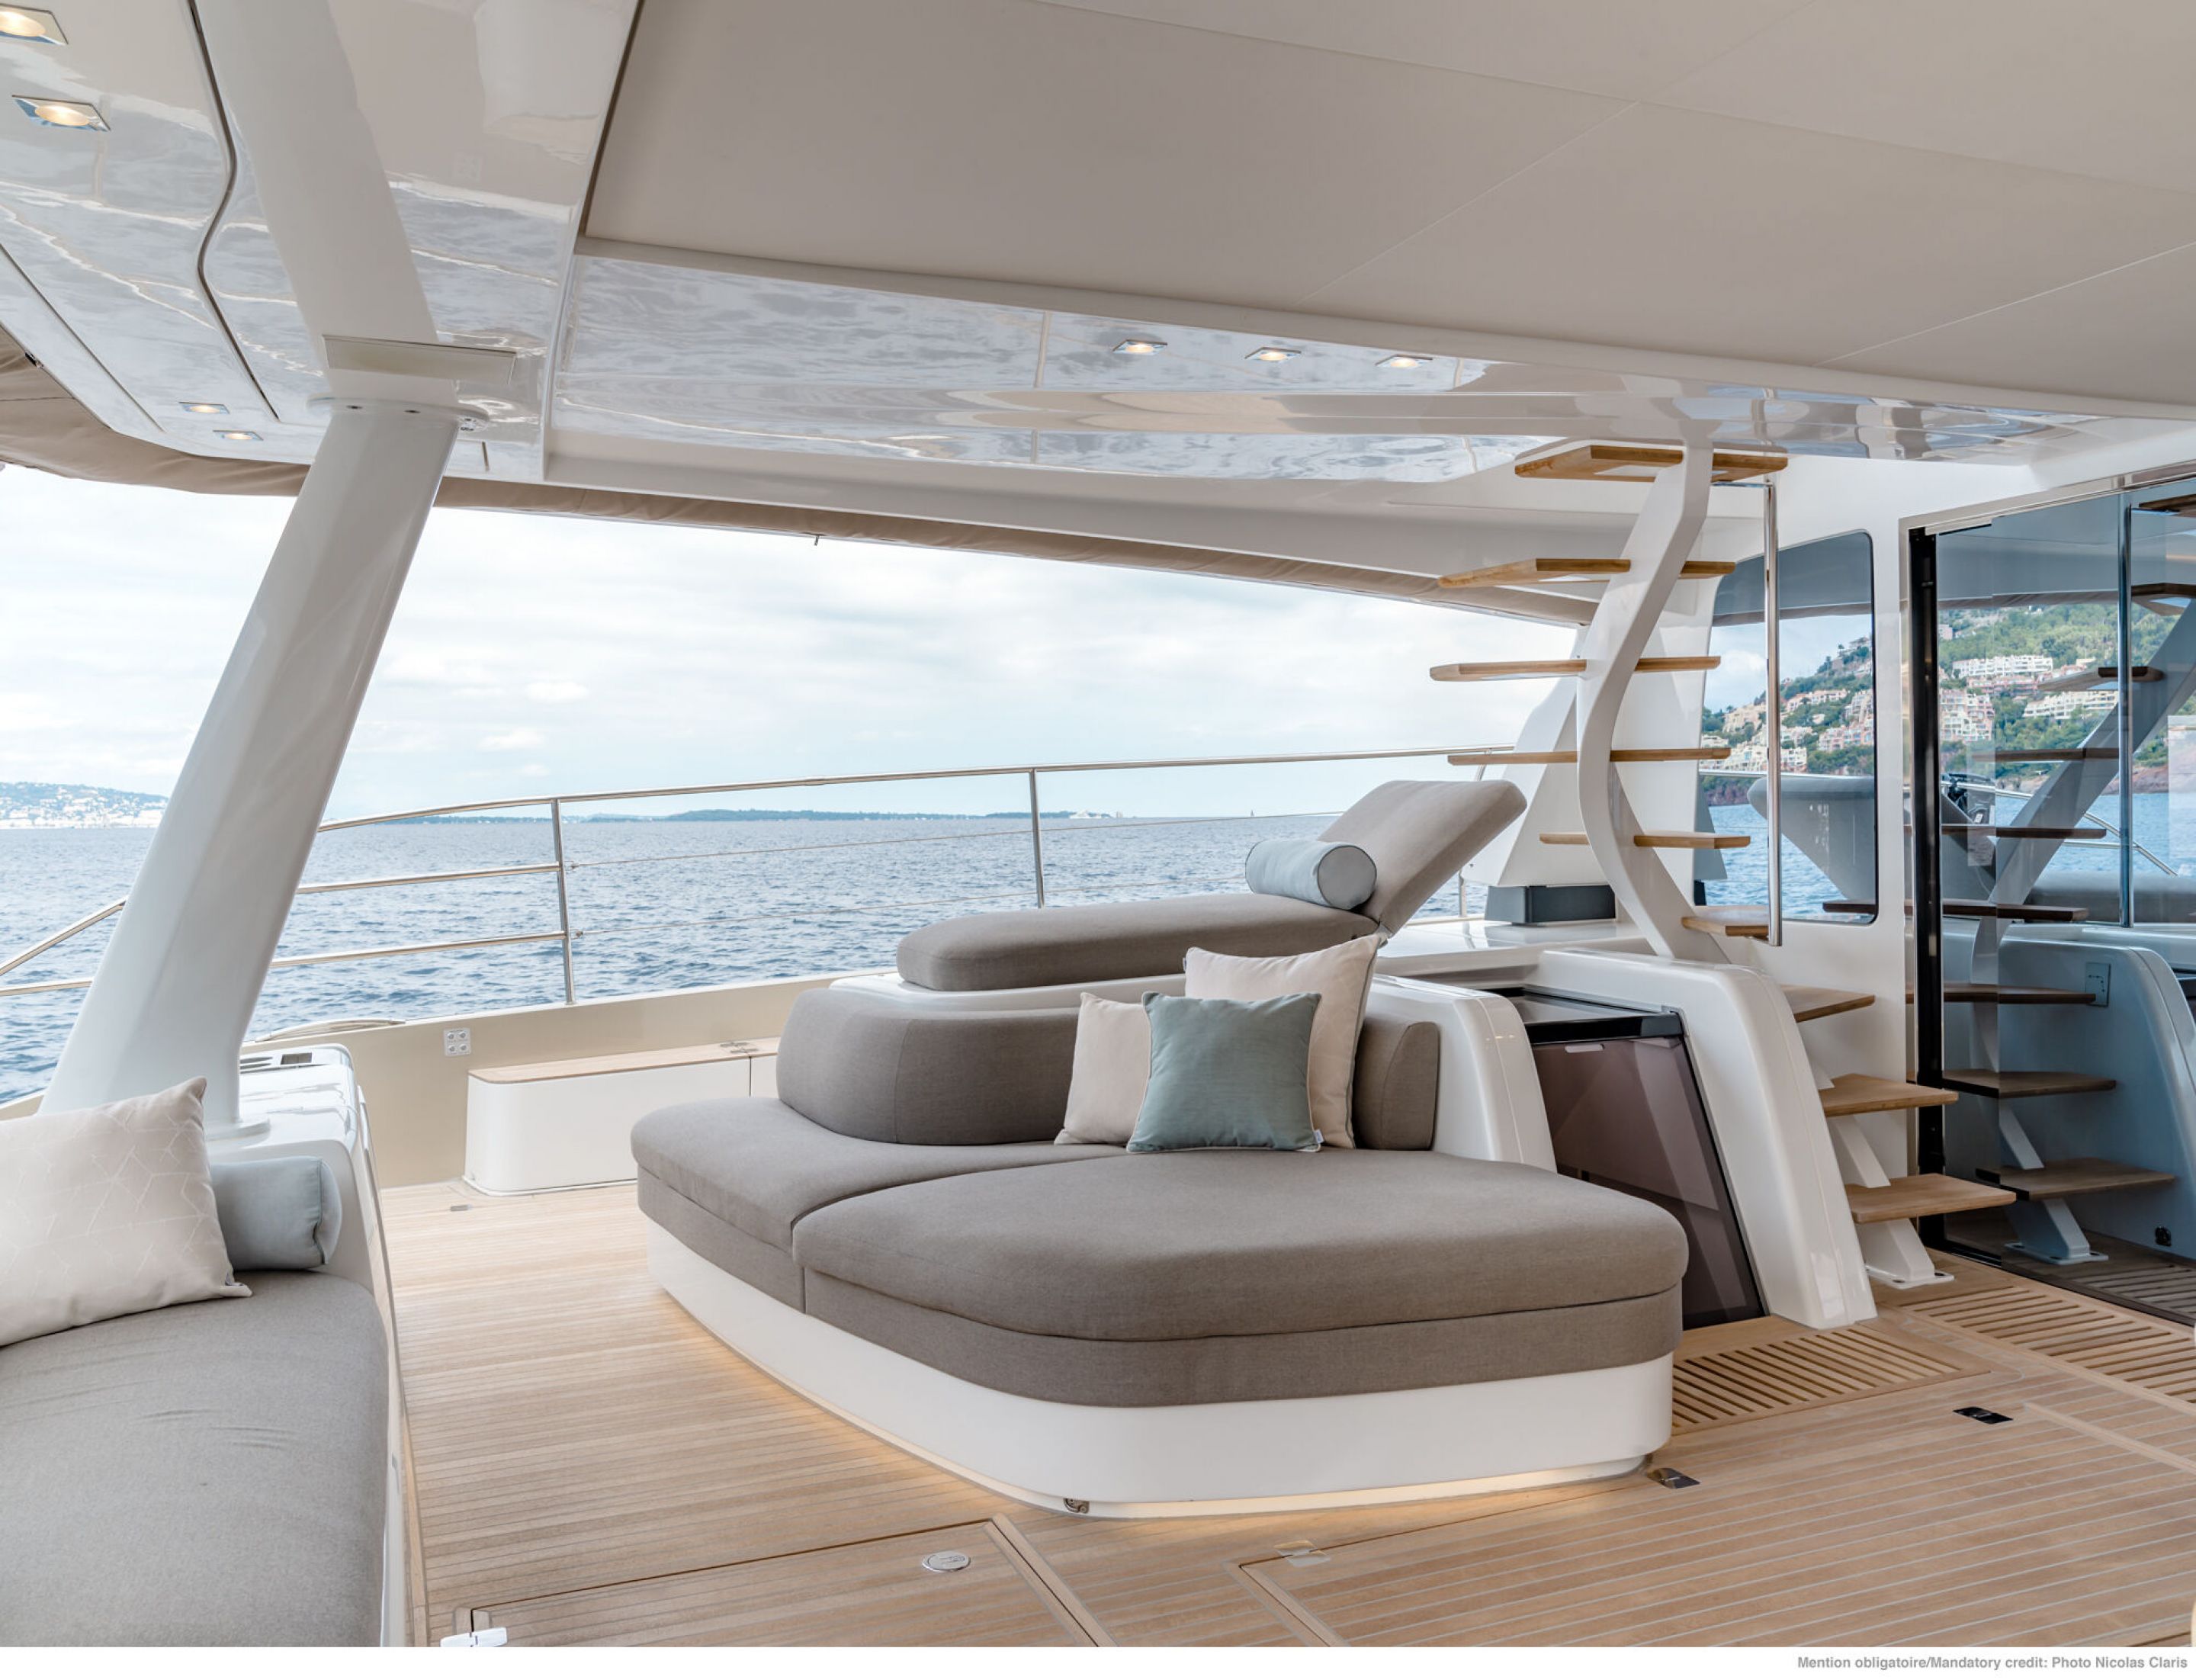 Aft deck lounge seating and stairs to flybridge